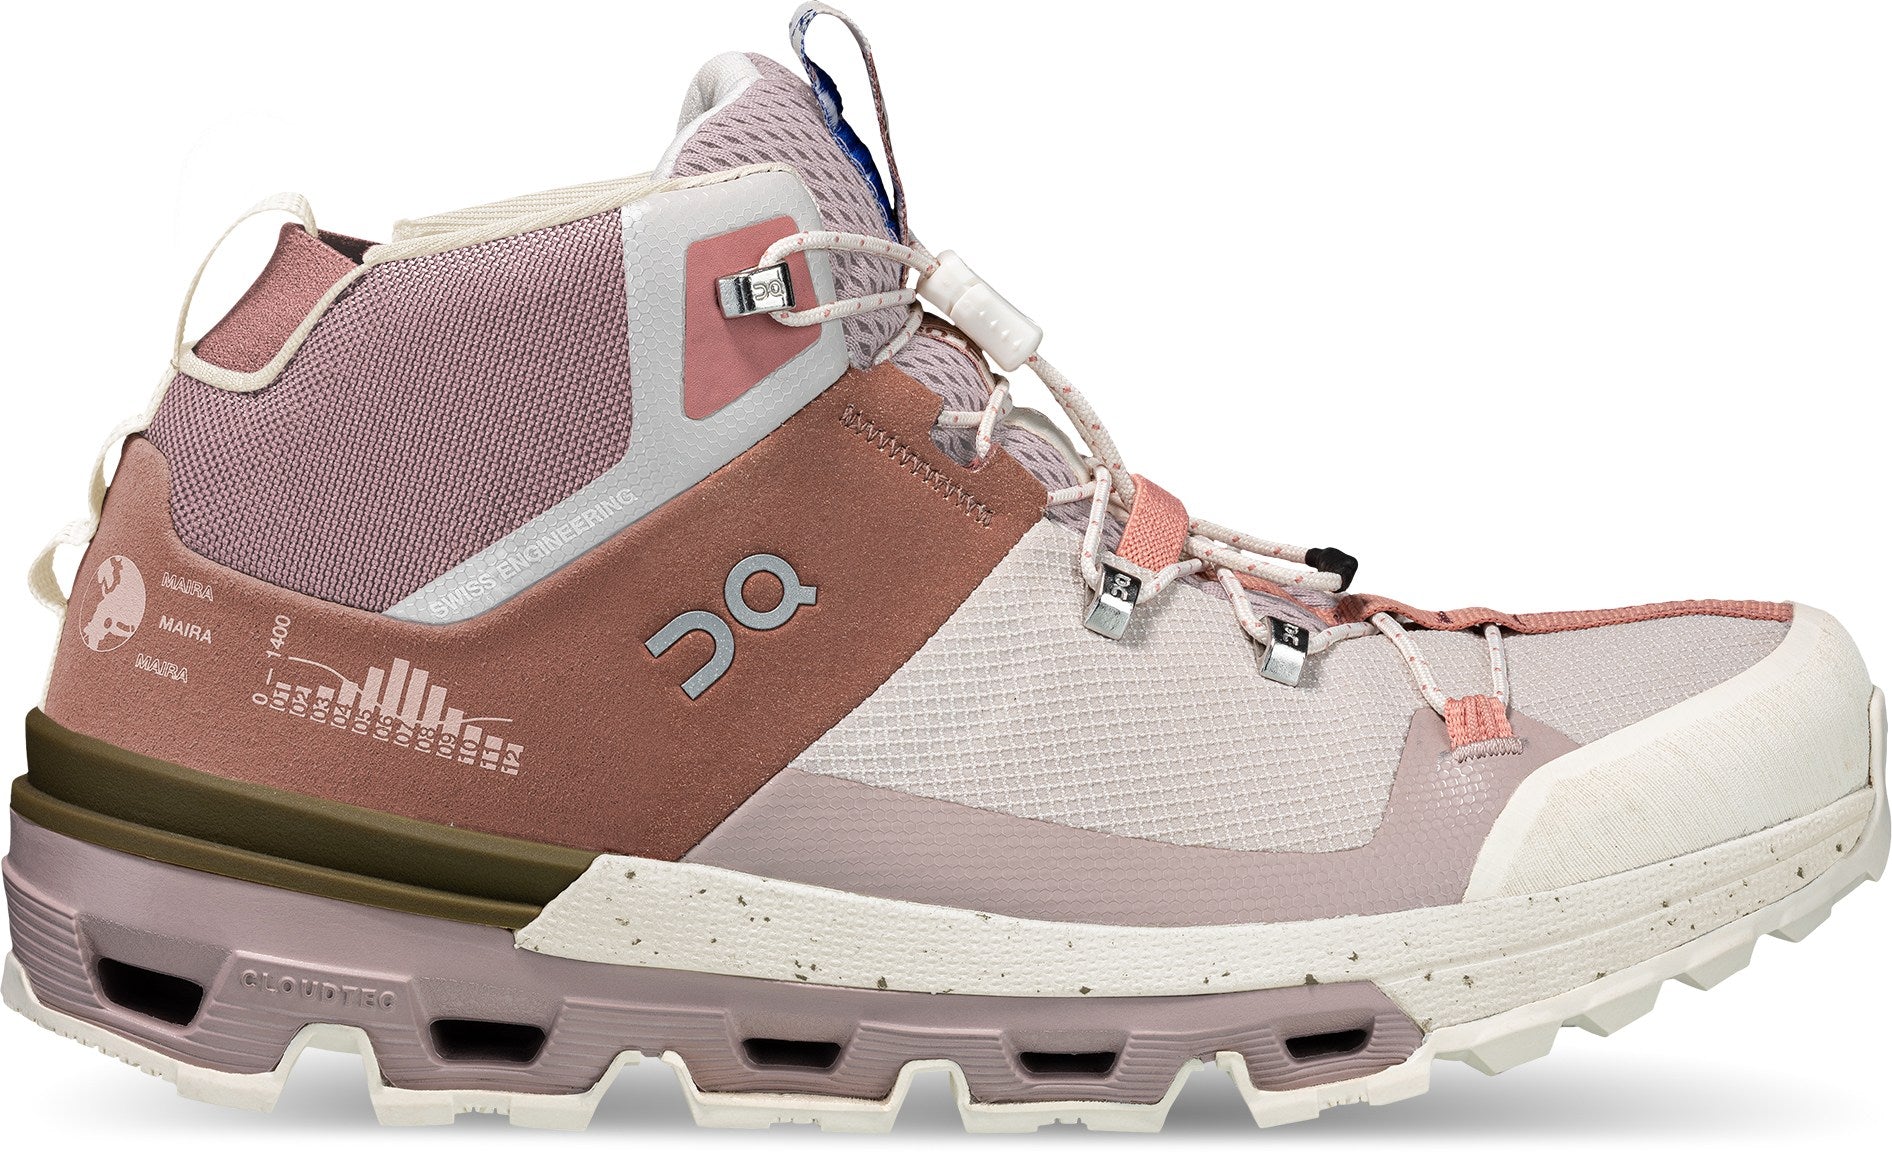 Lateral view of the Women's Cloudtrax hiking boot by ON in the color Rose/Ivory